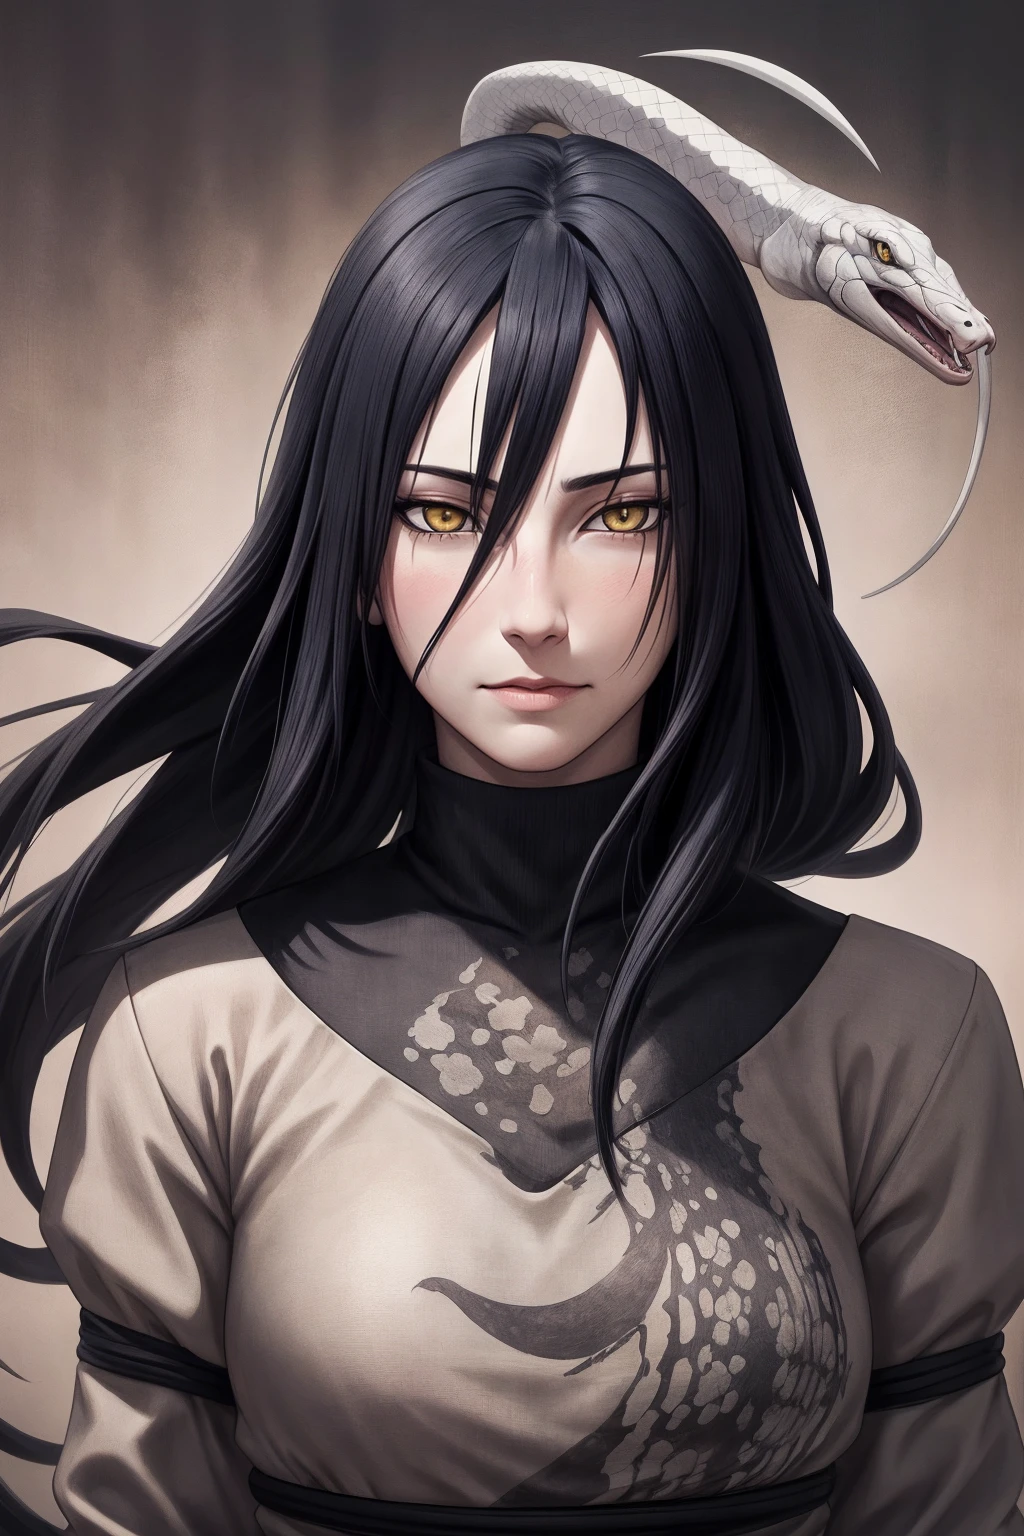 {-erro_de_anatomia:1.0} estilo anime, Masterpiece, absurdities, Orochimaru\(Naruto\), 1girl Solo, Mature woman, Oversized shirt with broad shoulders, Perfect composition, Detailed lips, large breasts, Beautiful face, body proportion, Blush, Long black hair, ( black hair), yellow eyes, Soft gauze, Super realistic, Detailed, photo shoot, Realistic faces and bodies, masterpiece, best quality, best ( white snake) illustration, hyper detailed, 1 girl, solo, glamorous, blushing, whole body, 